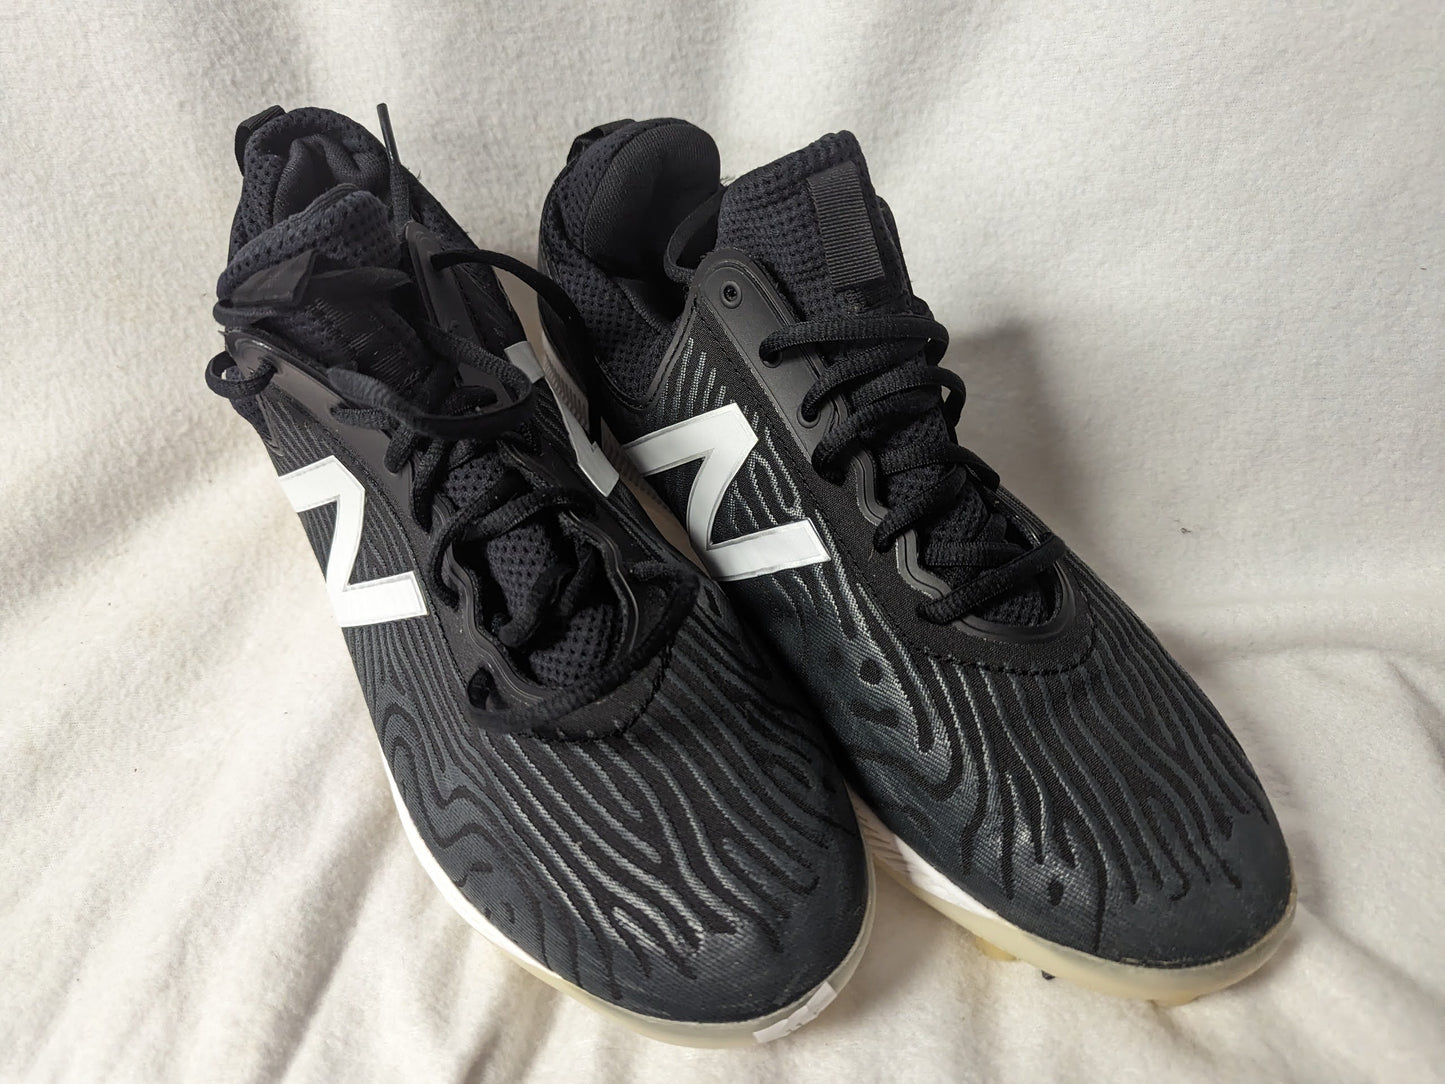 New Balance Cleats Size 11.5 Color Black Condition Used